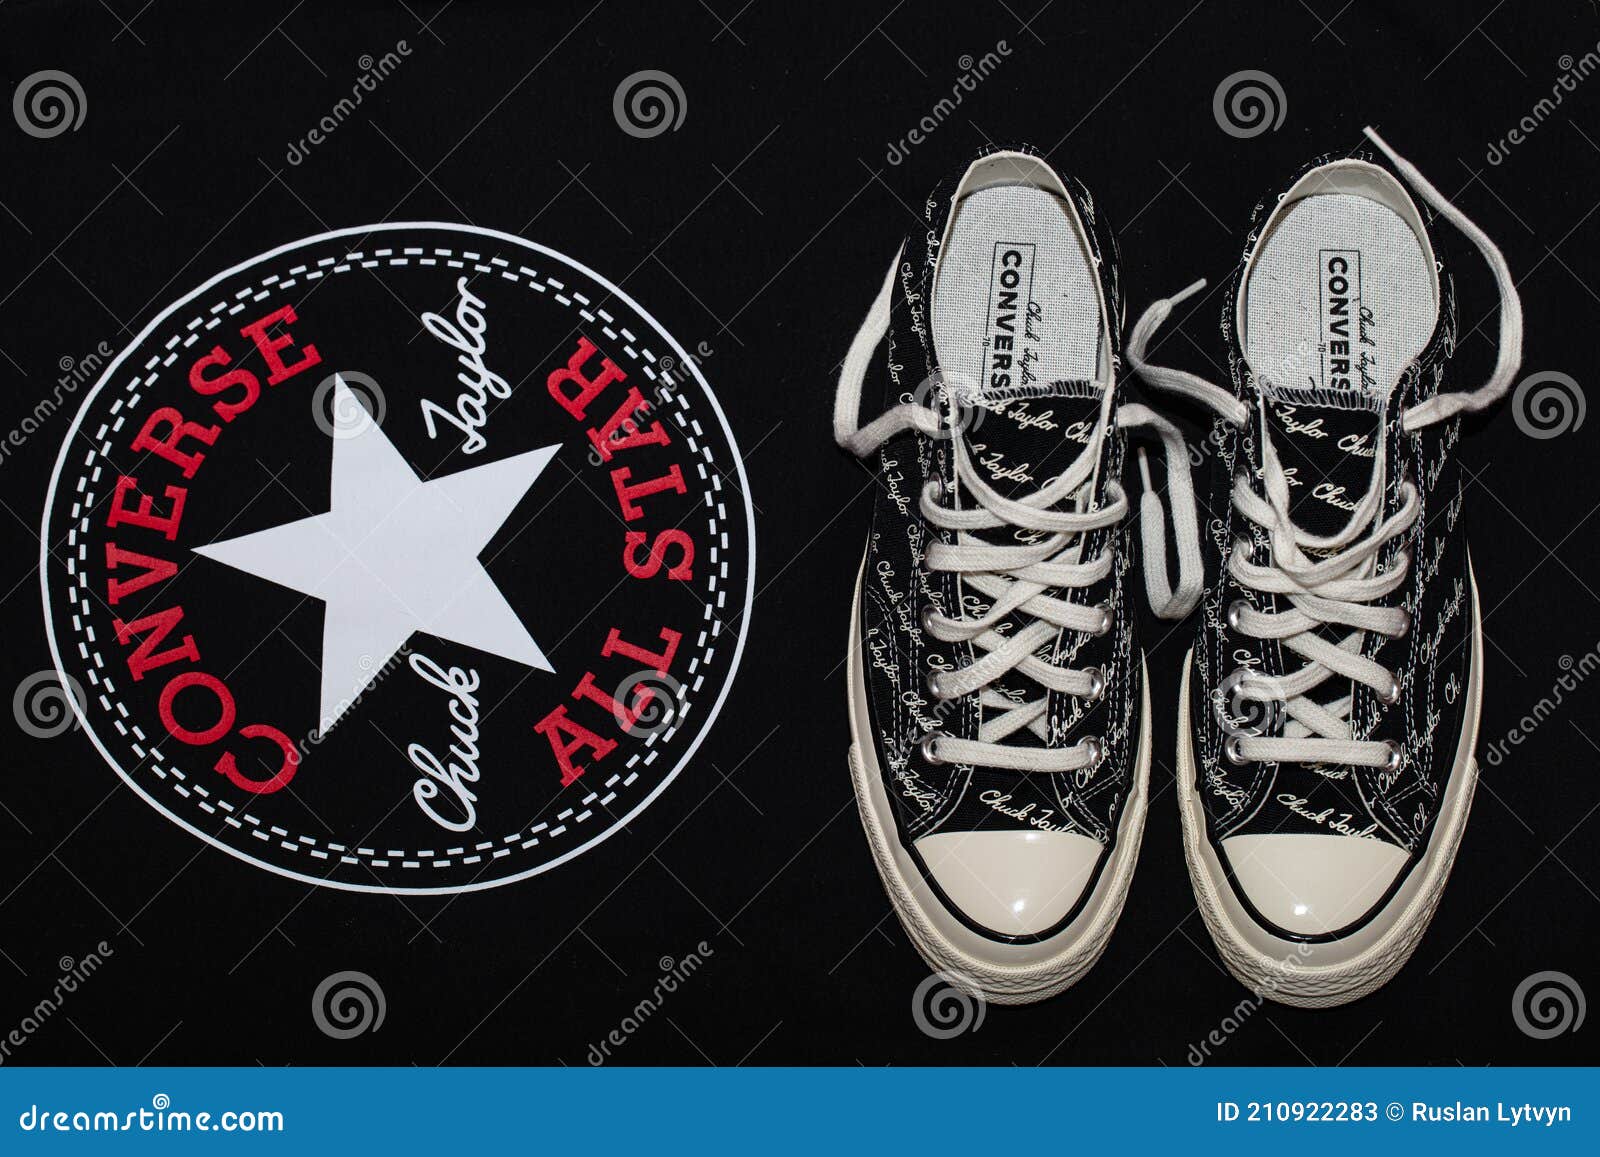 Converse All Stars Black with Chuck Tailor Text Editorial Stock Photo - Illustration of shoes: 210922283